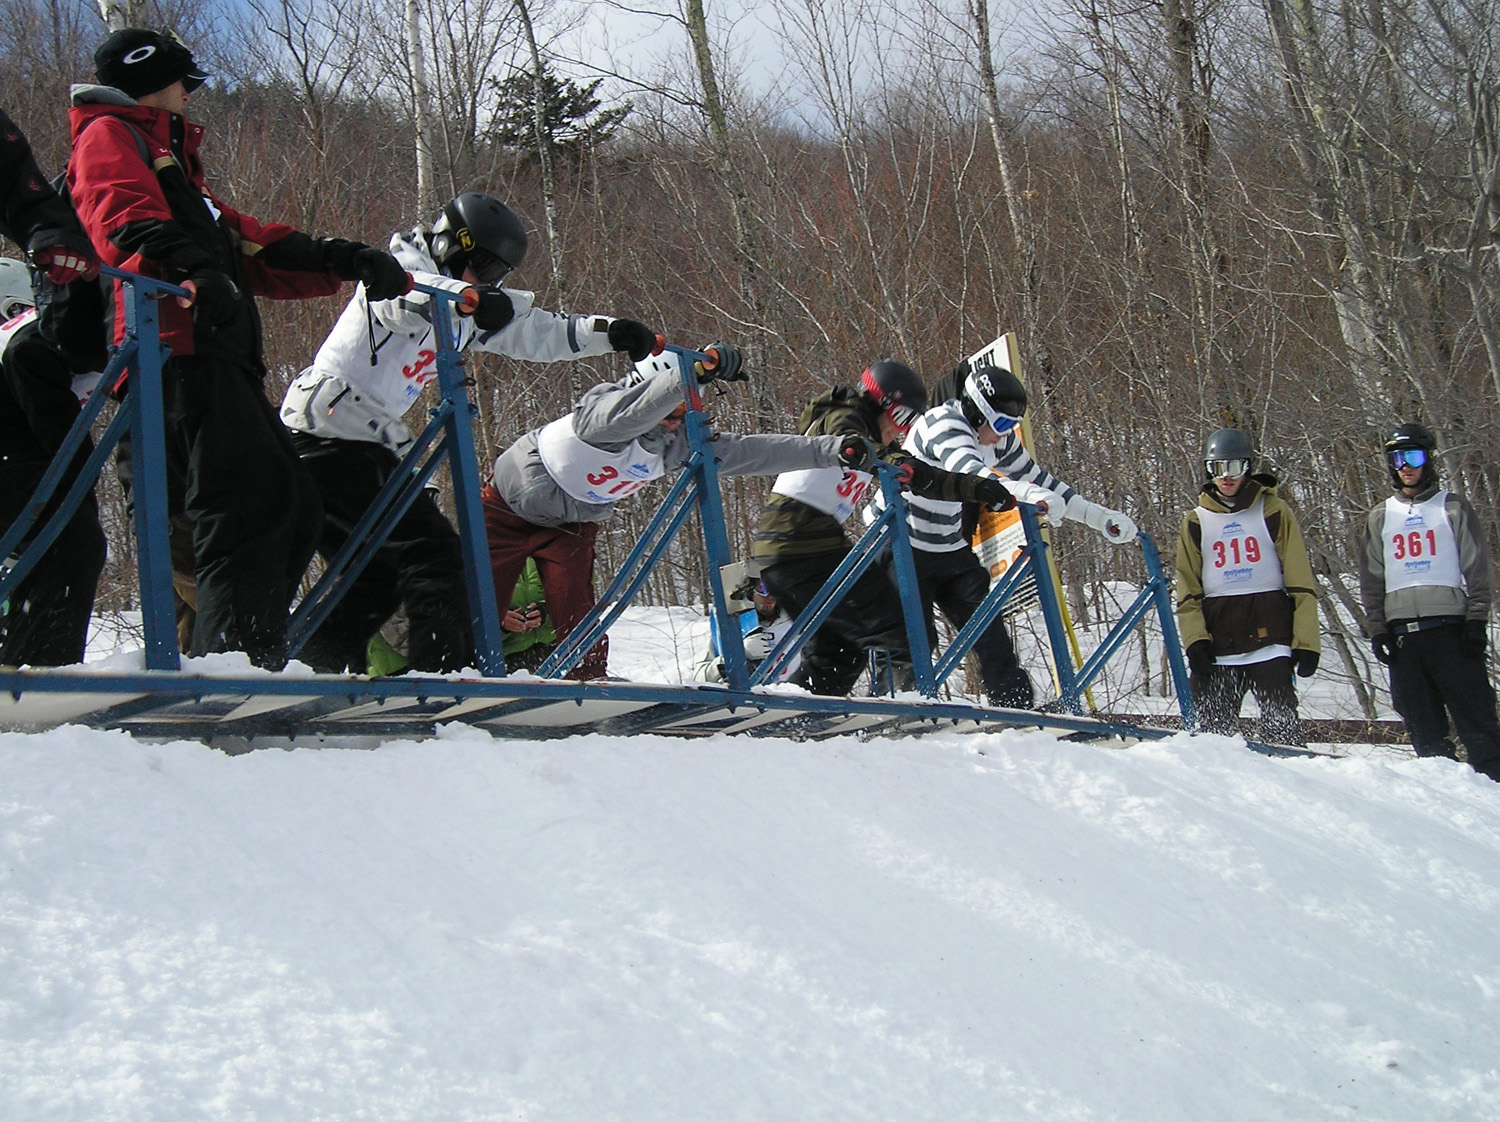 Snow boarders in the gates preparing for a race to start